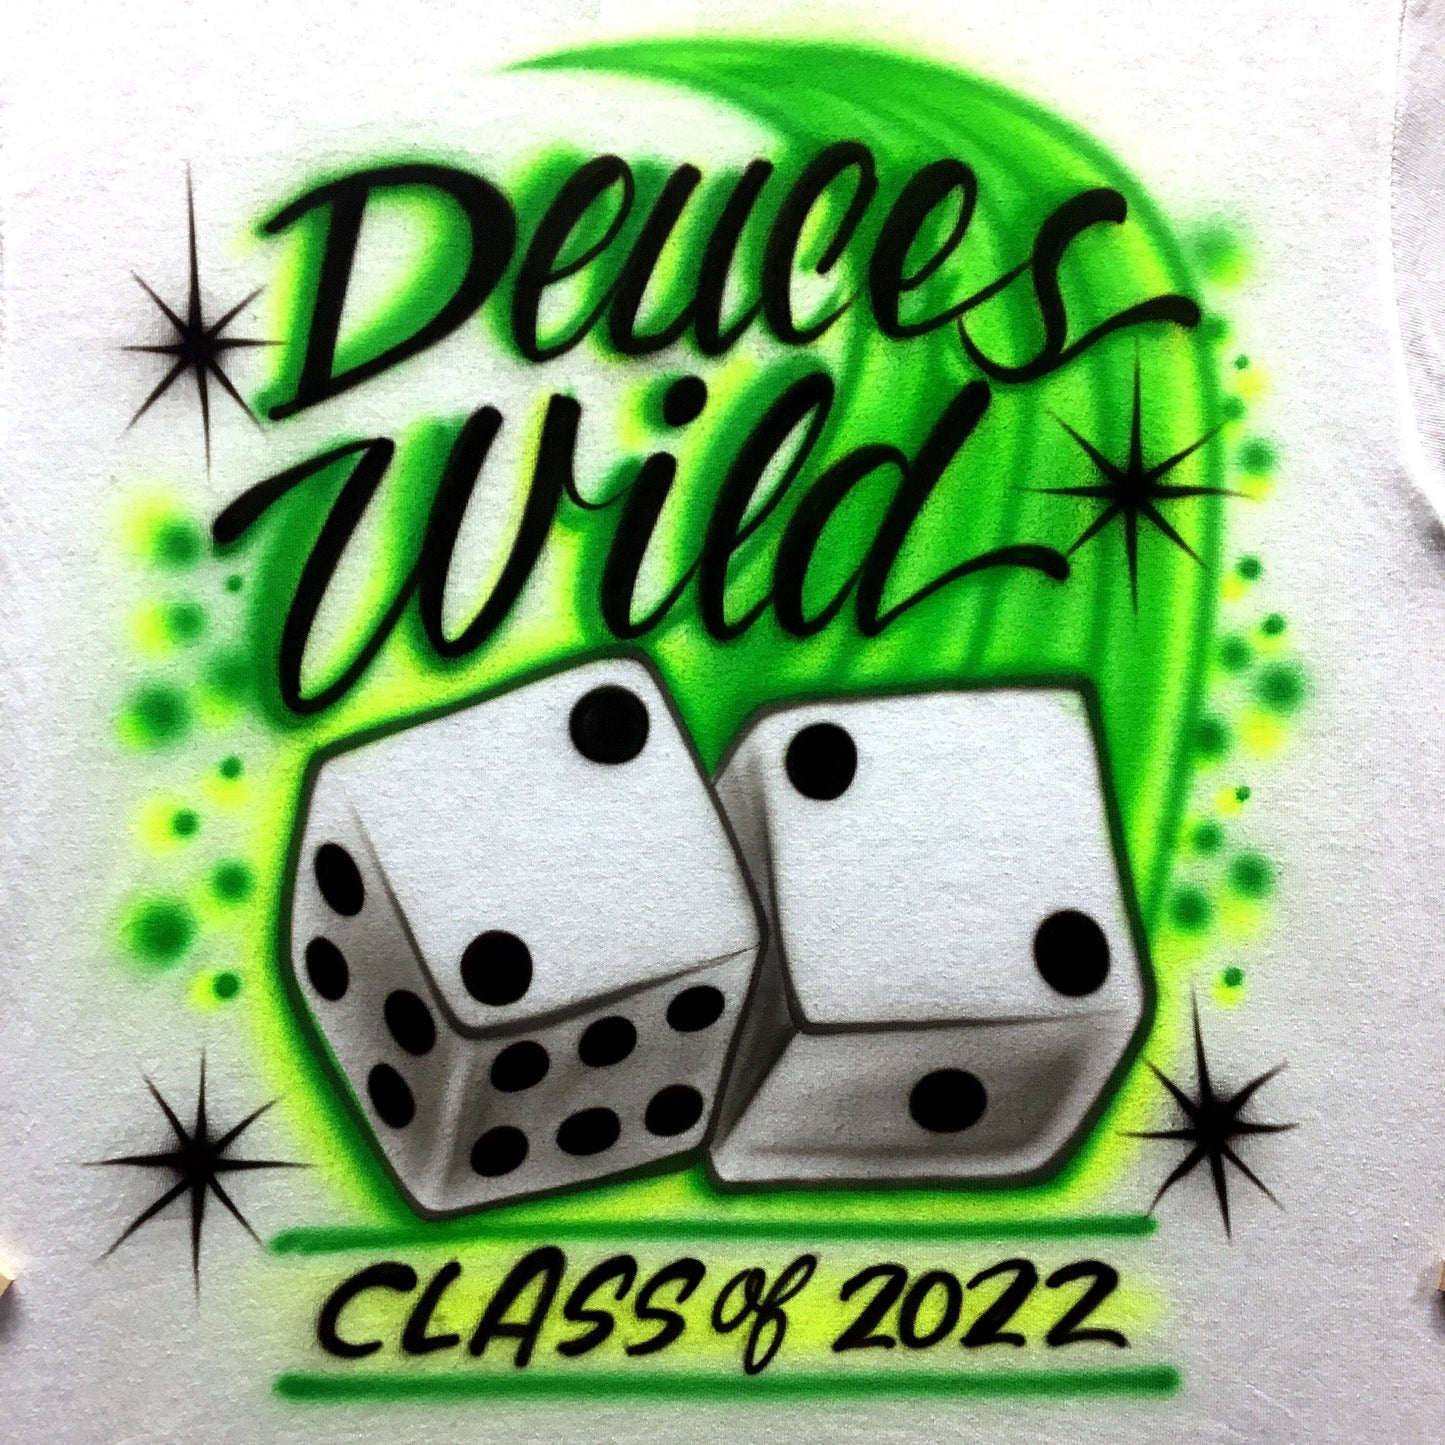 Airbrush T-shirt  * Class of * Dice * Deuces Wild * You choose colors